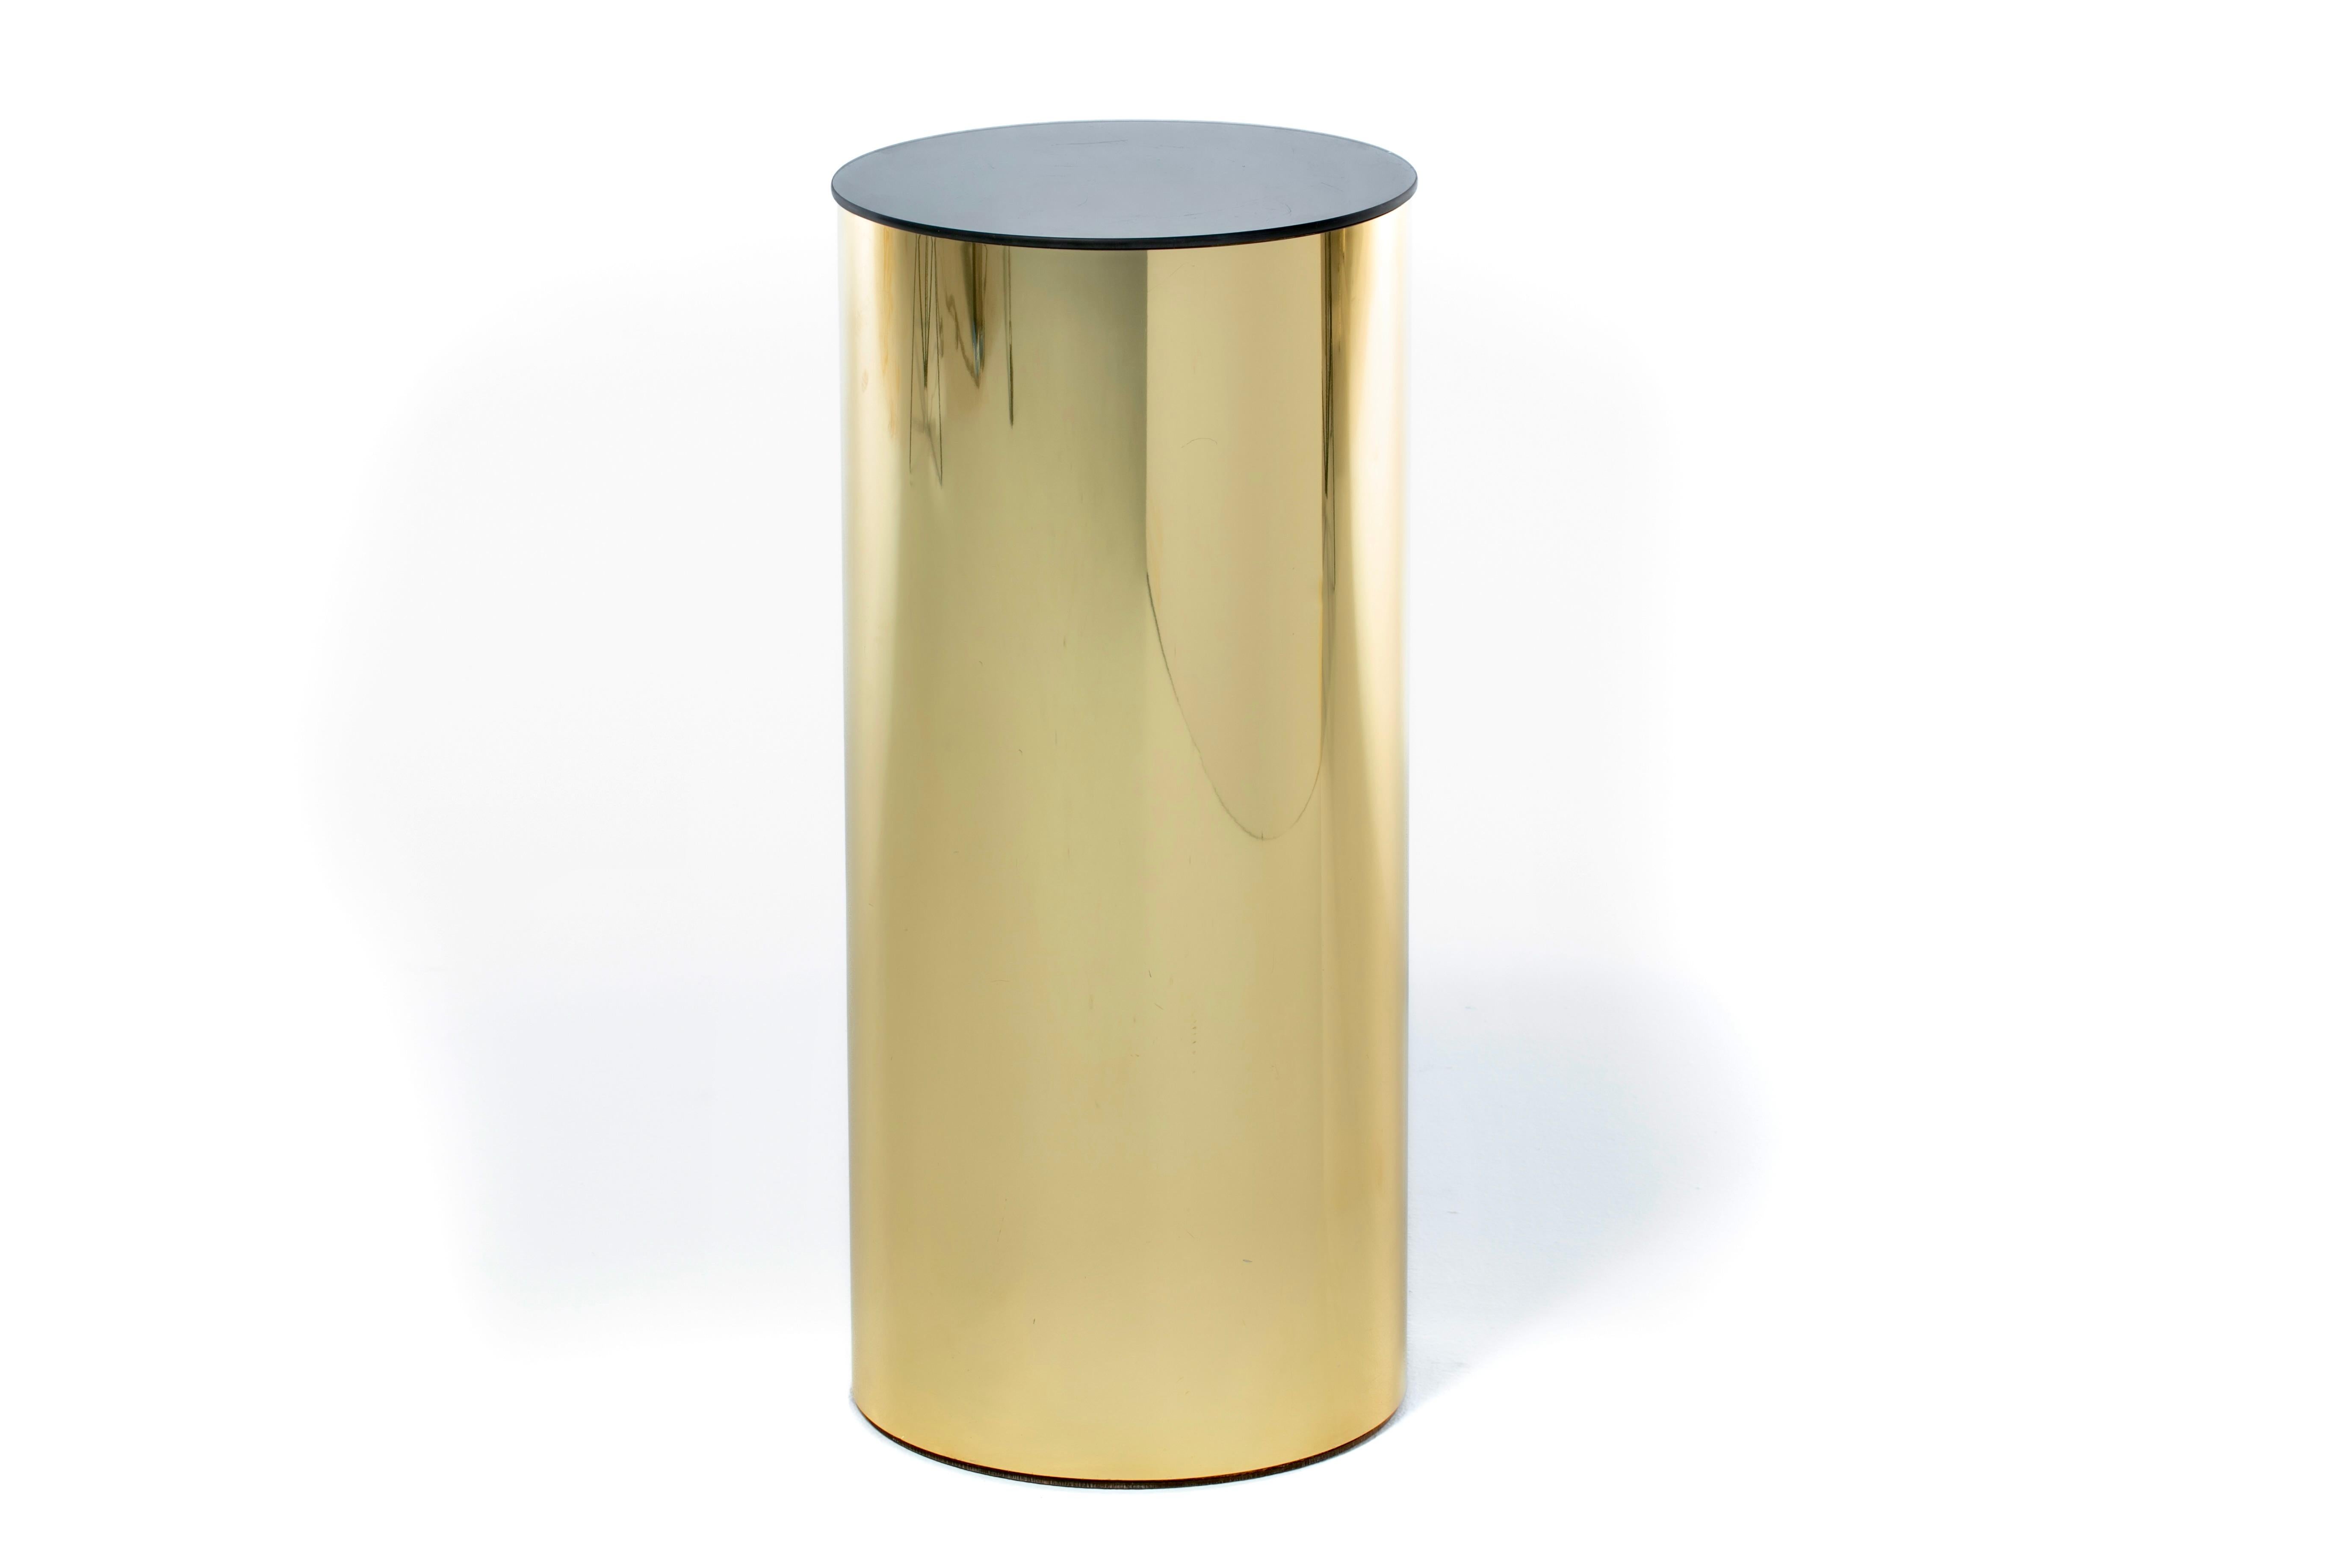 Post Modern Curtis Jere Circular Pedestal of Brass and Smoked Glass, c. 1984 In Good Condition For Sale In Saint Louis, MO